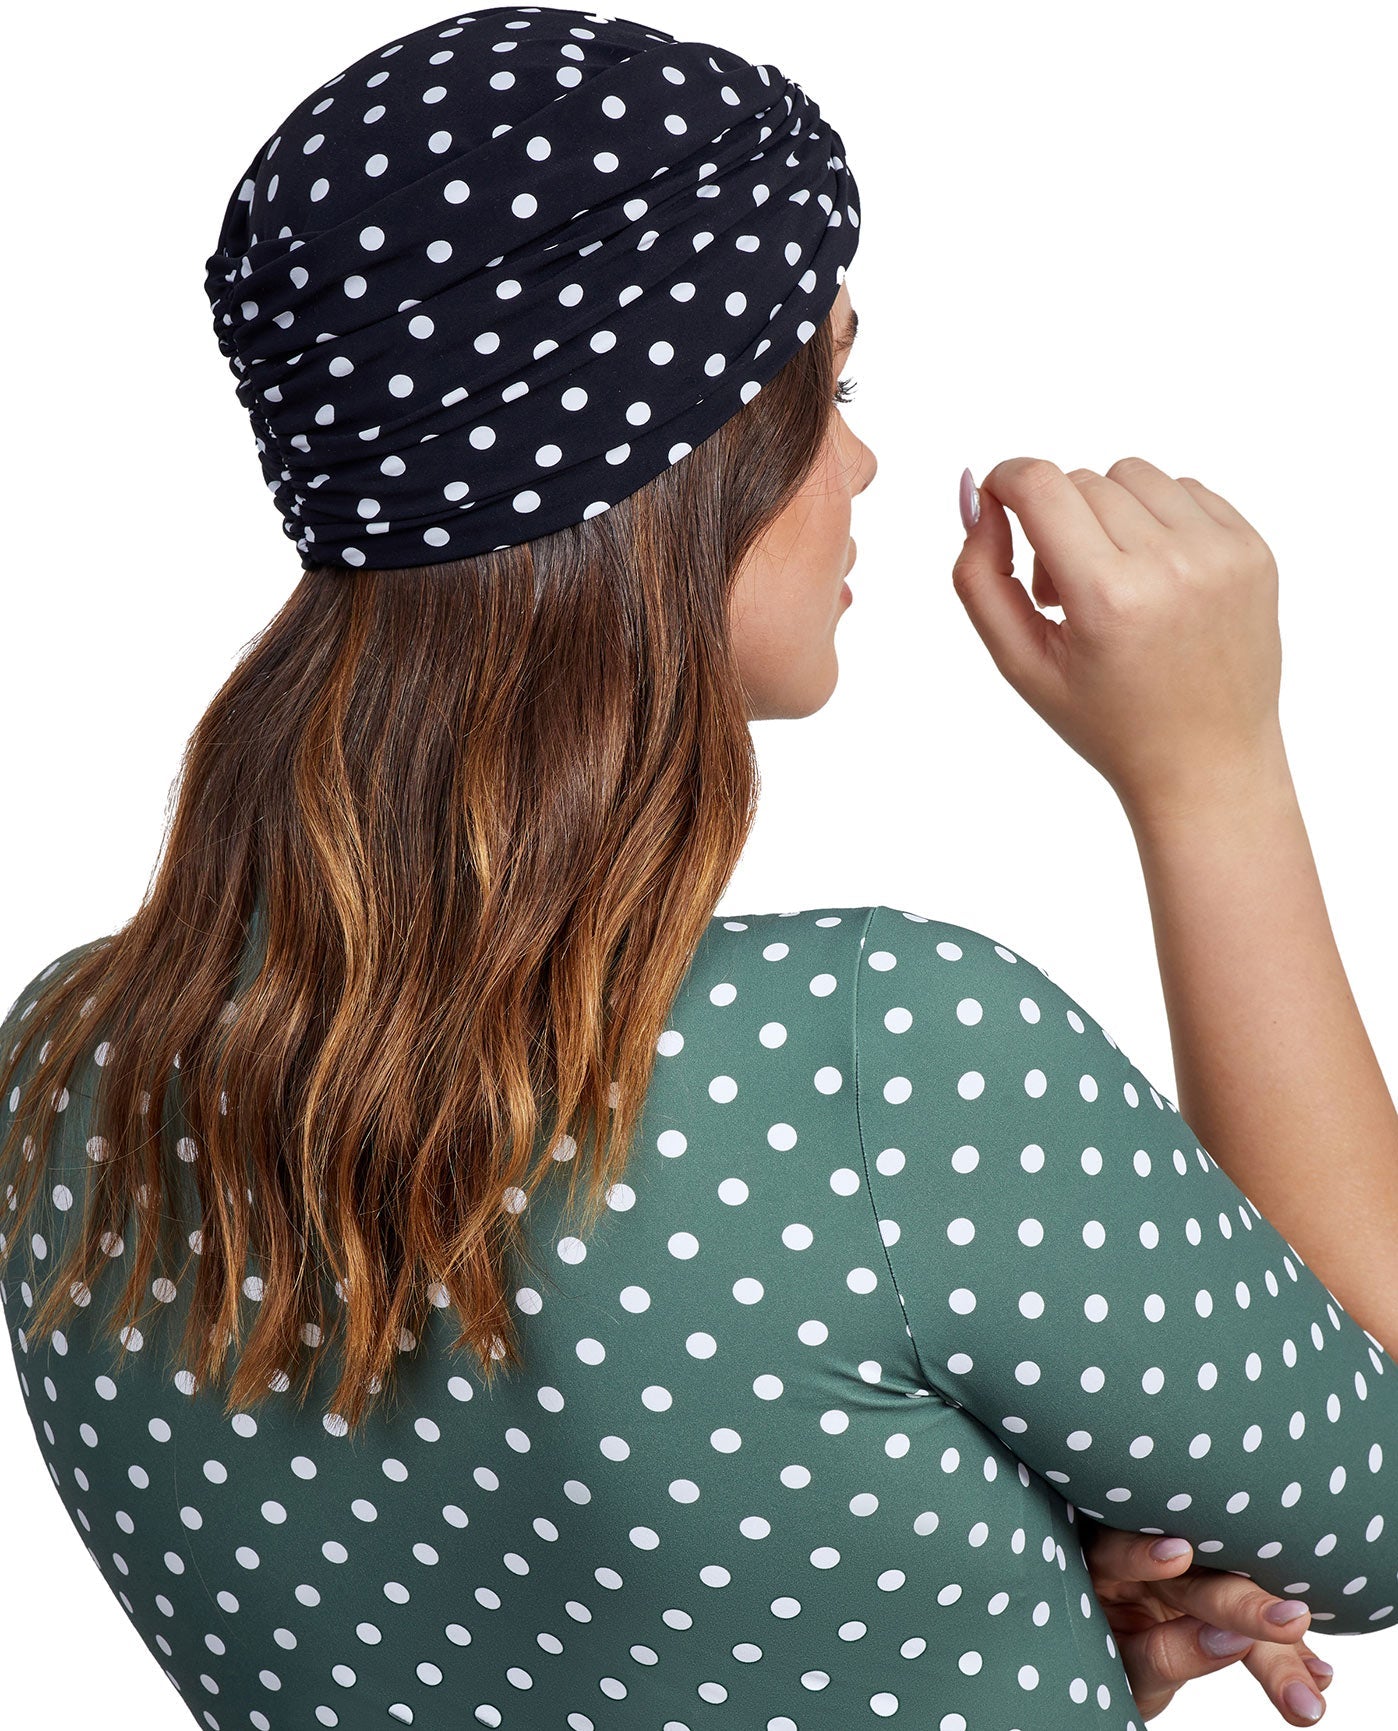 Back View Of Gottex Modest Knotted Hair Covering | GOTTEX MODEST BLACK AND WHITE DOTS